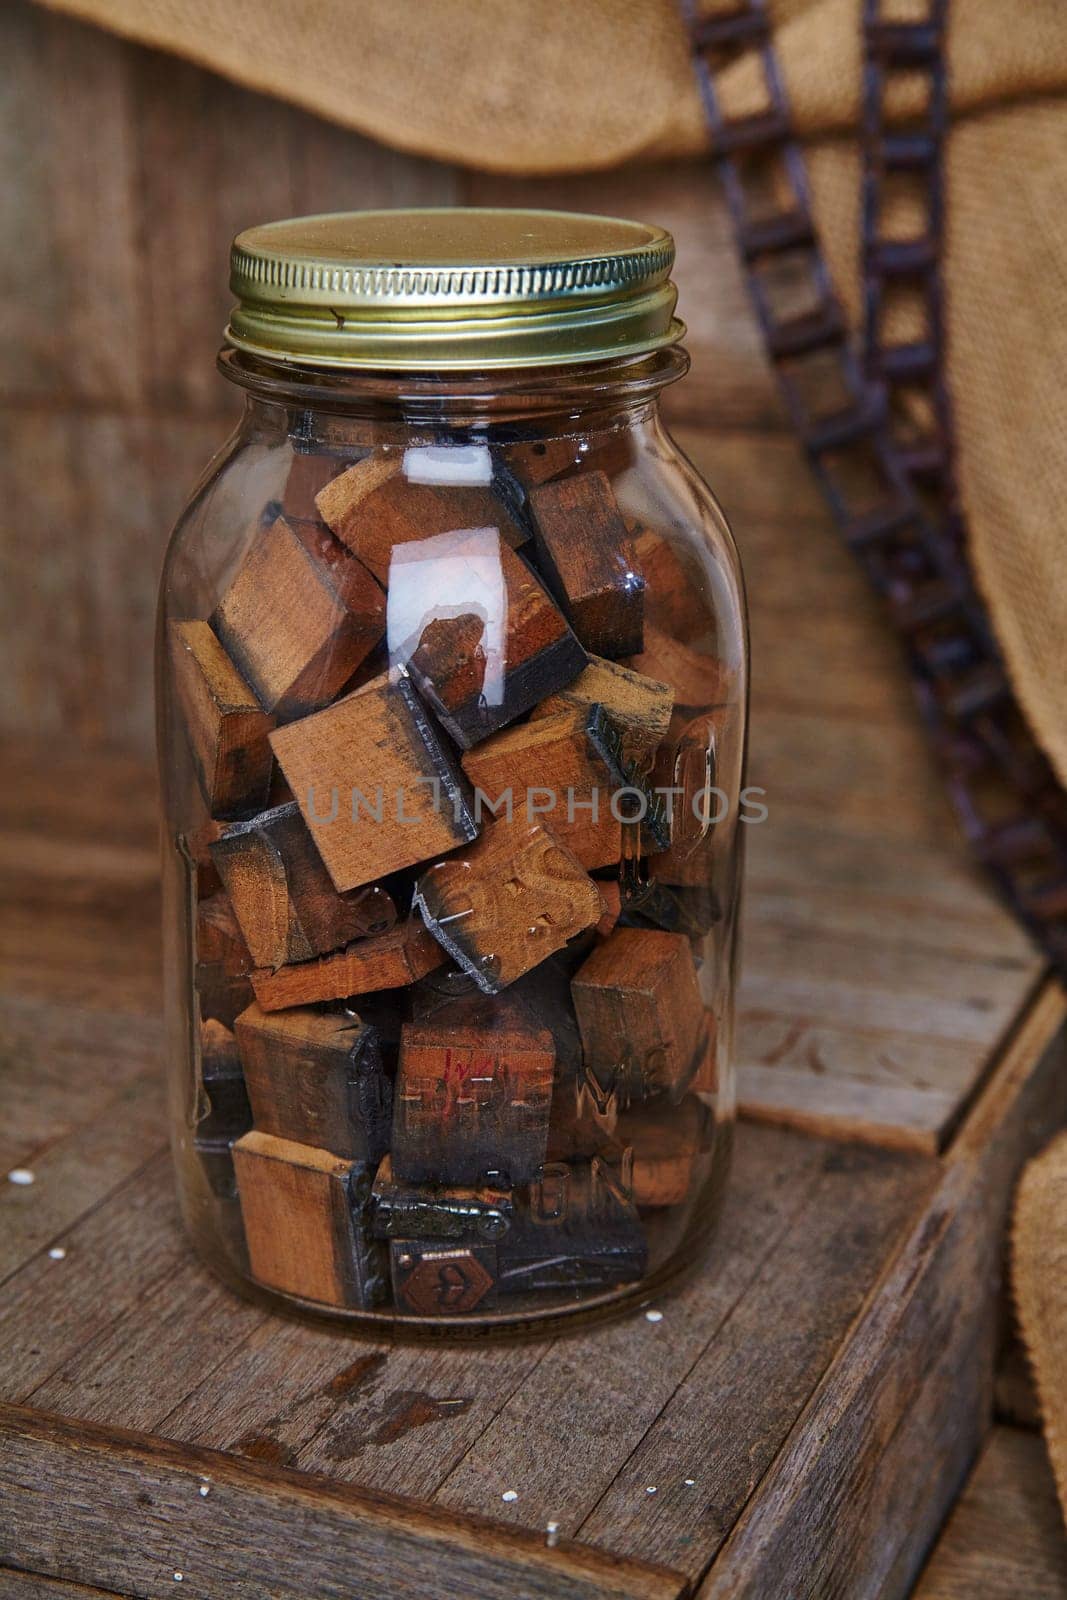 Vintage wooden letterpress blocks in a glass jar on a worn wooden surface, evoking nostalgia and artistic charm. Perfect for graphic designers, vintage decor enthusiasts, and artisanal crafters.